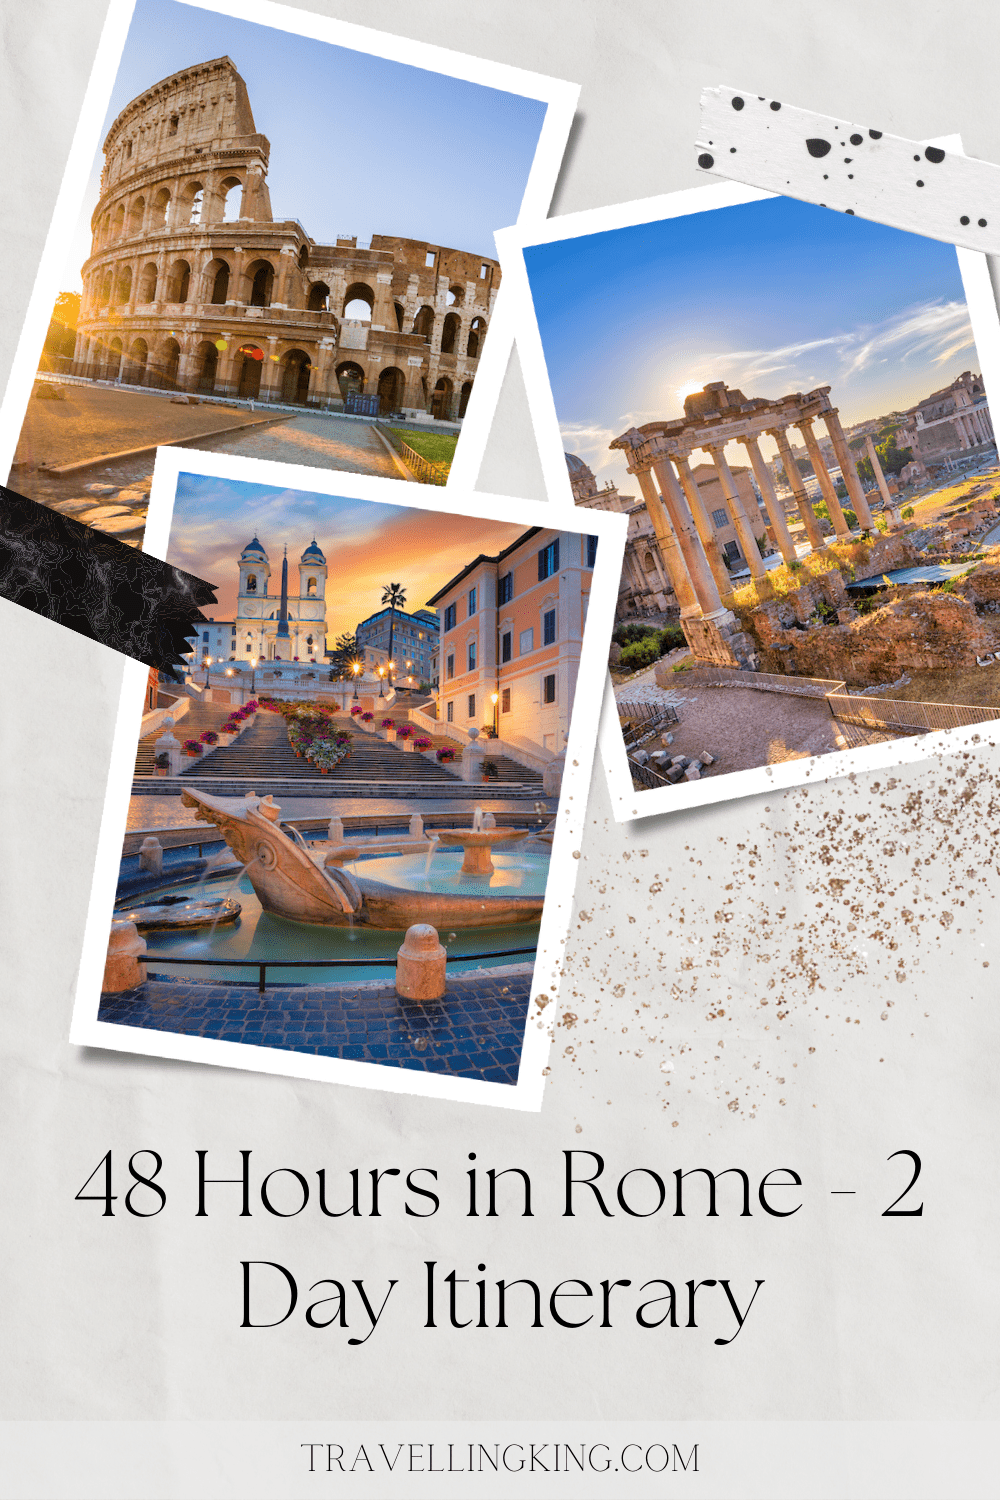 48 Hours in Rome - 2 Day Itinerary